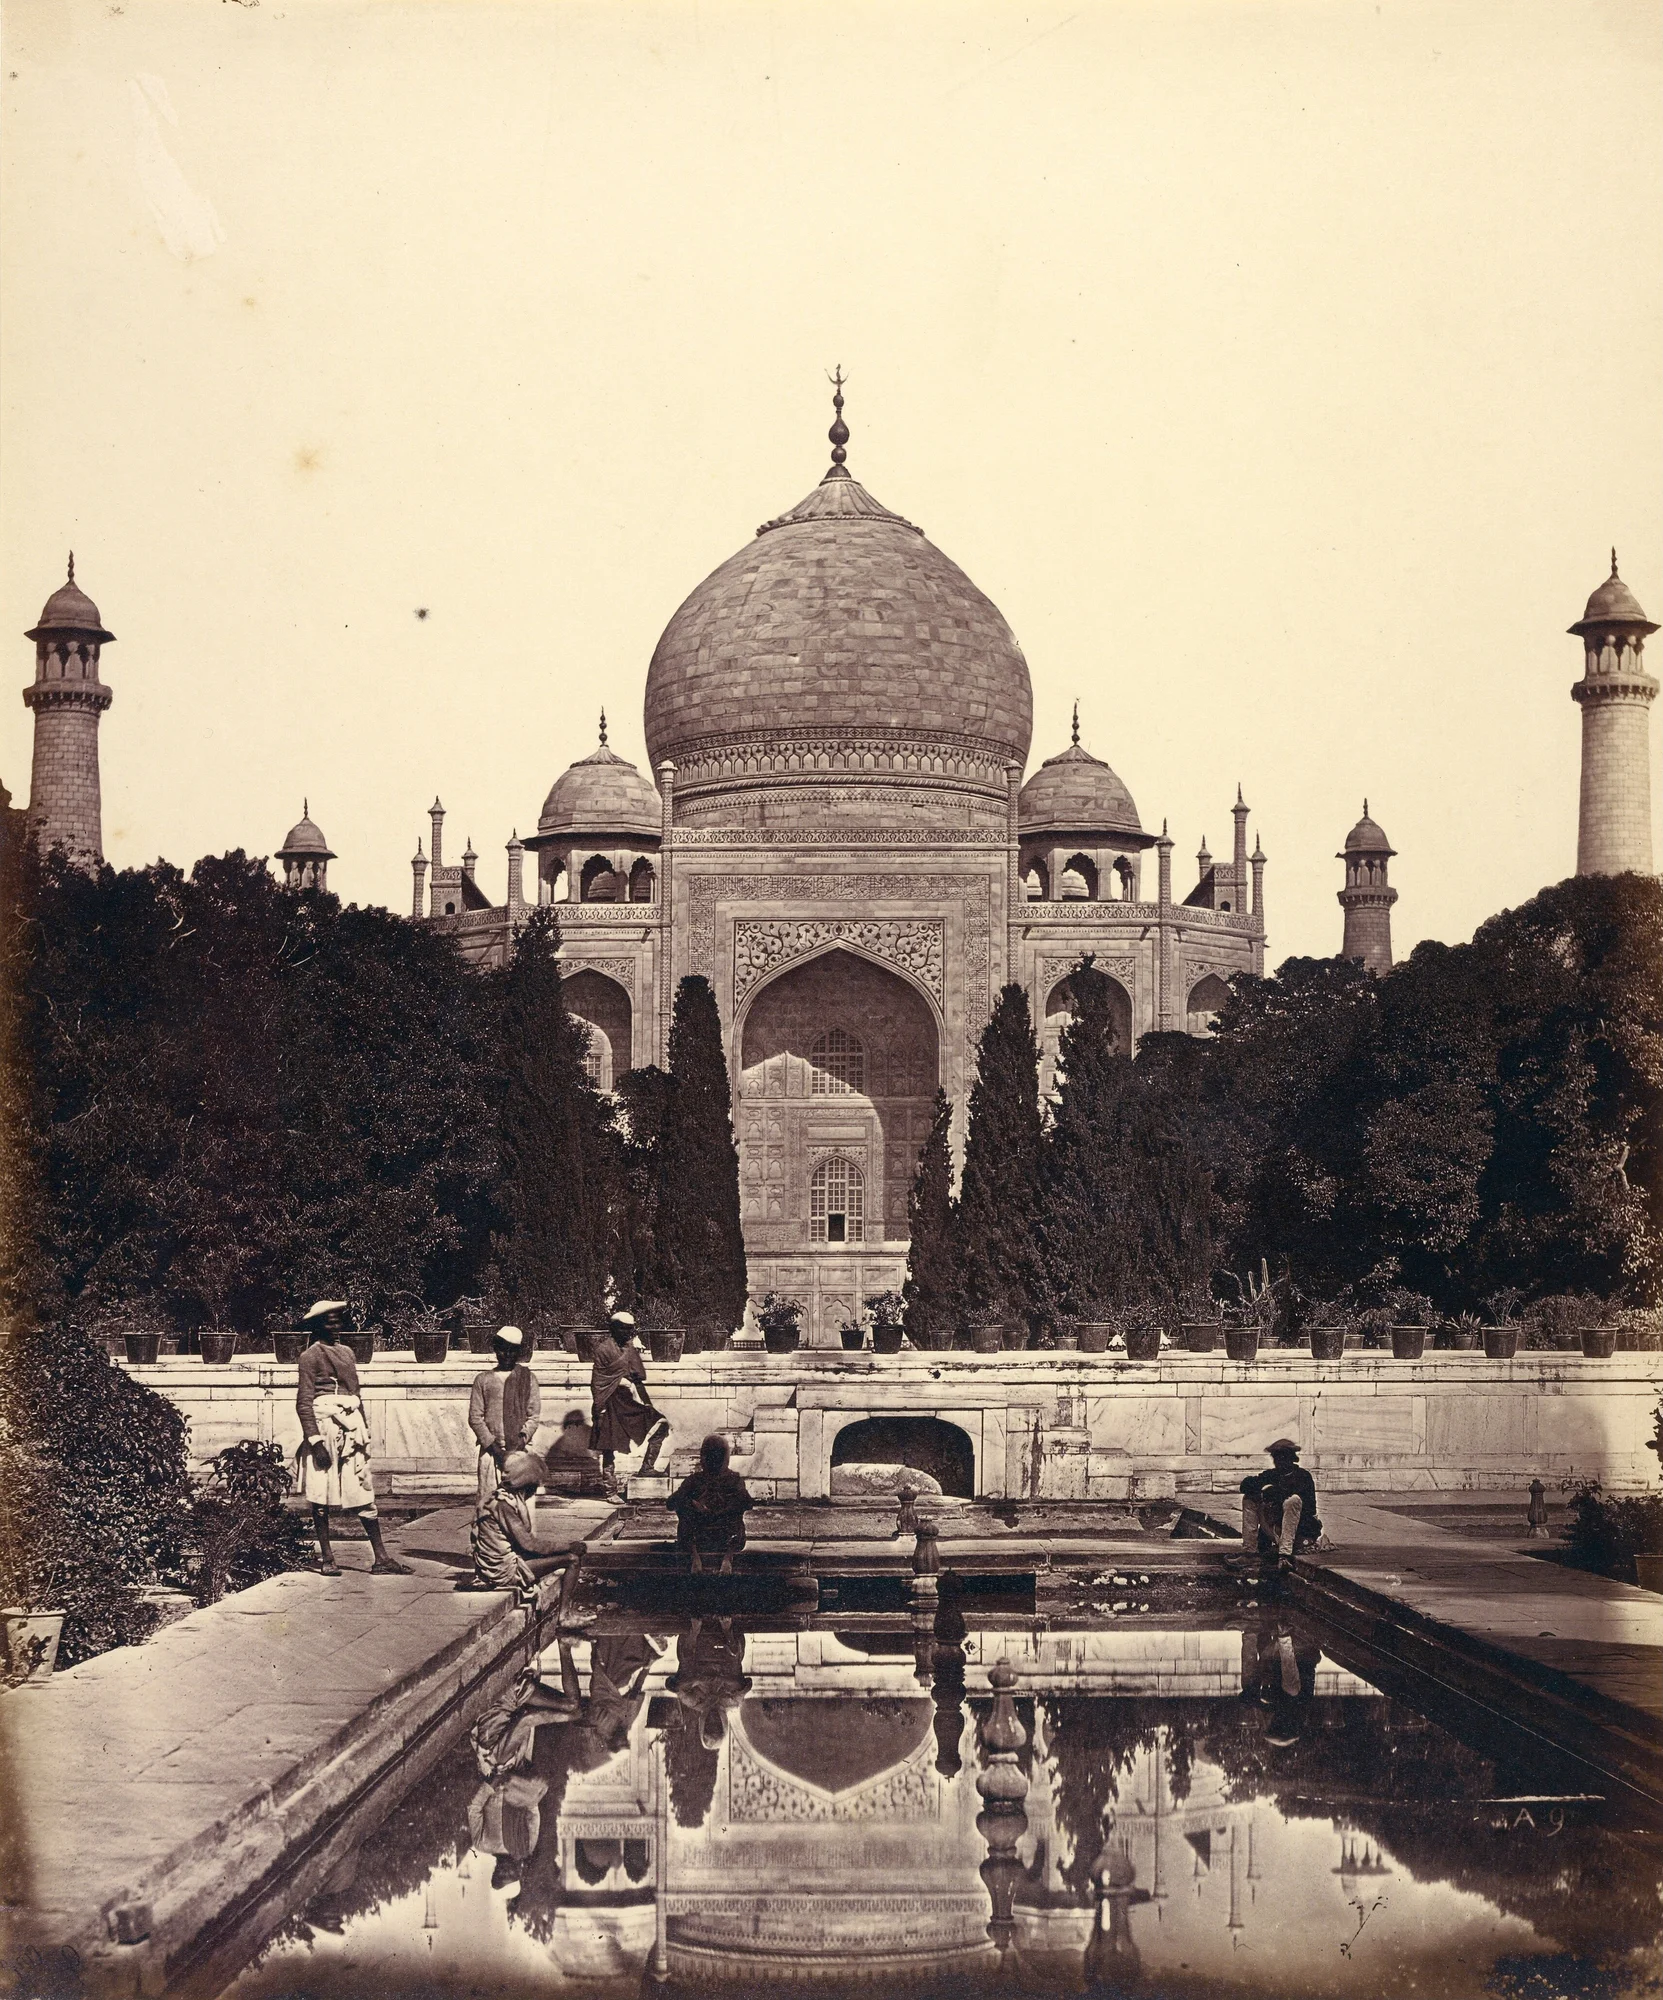 Black and white photograph of a large outdoor stone structure with rounded roofs, surrounded by trees, towers, and a large pool of water in the forefront.